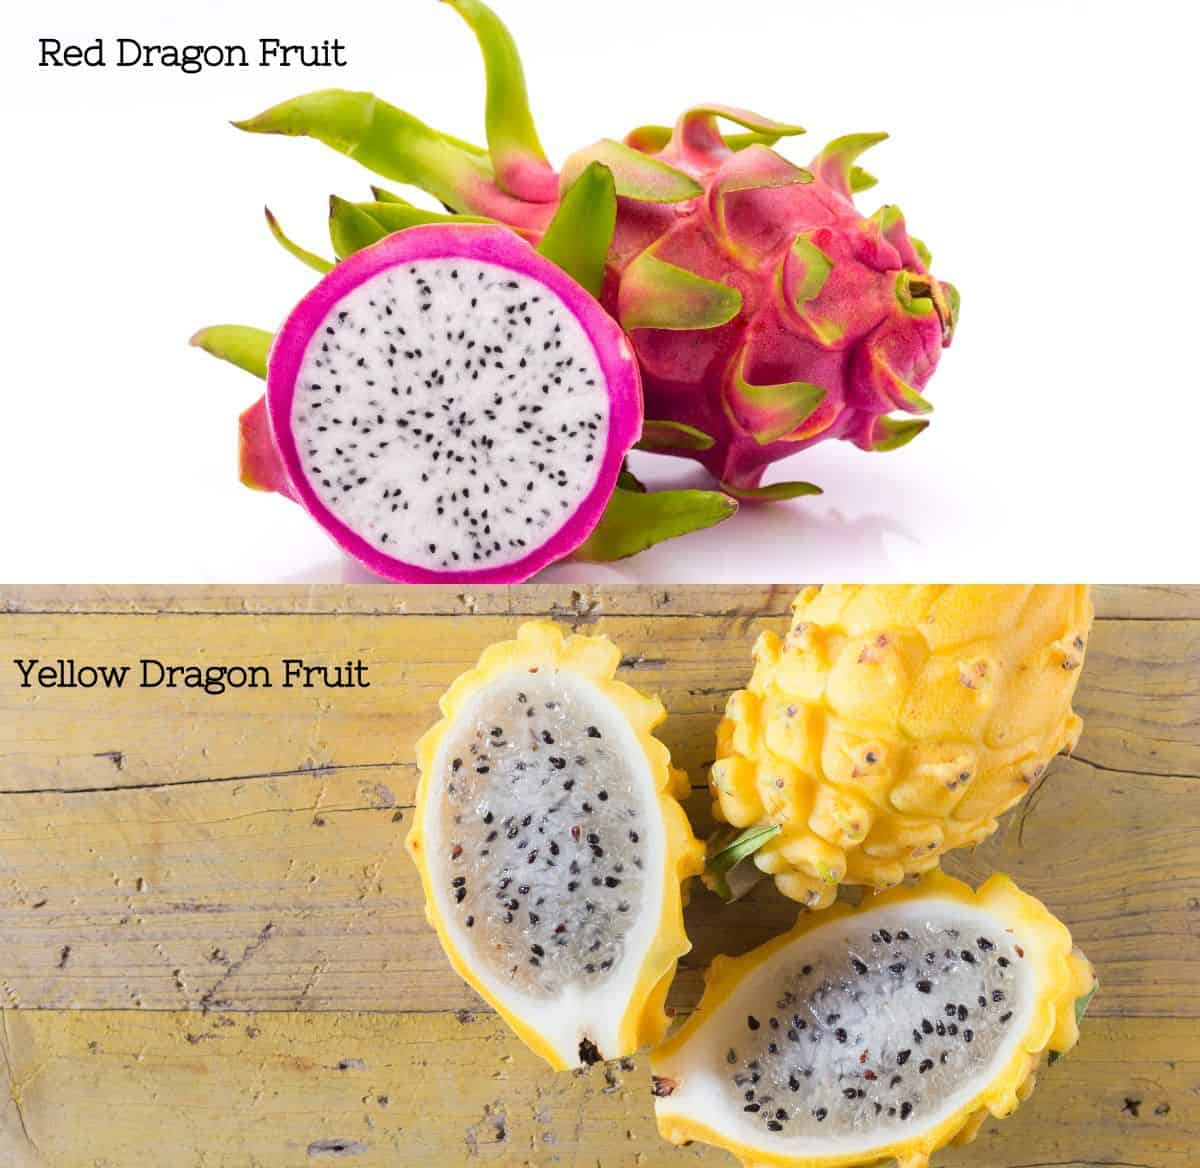 A split screen comparing red and yellow dragon fruit side by side.